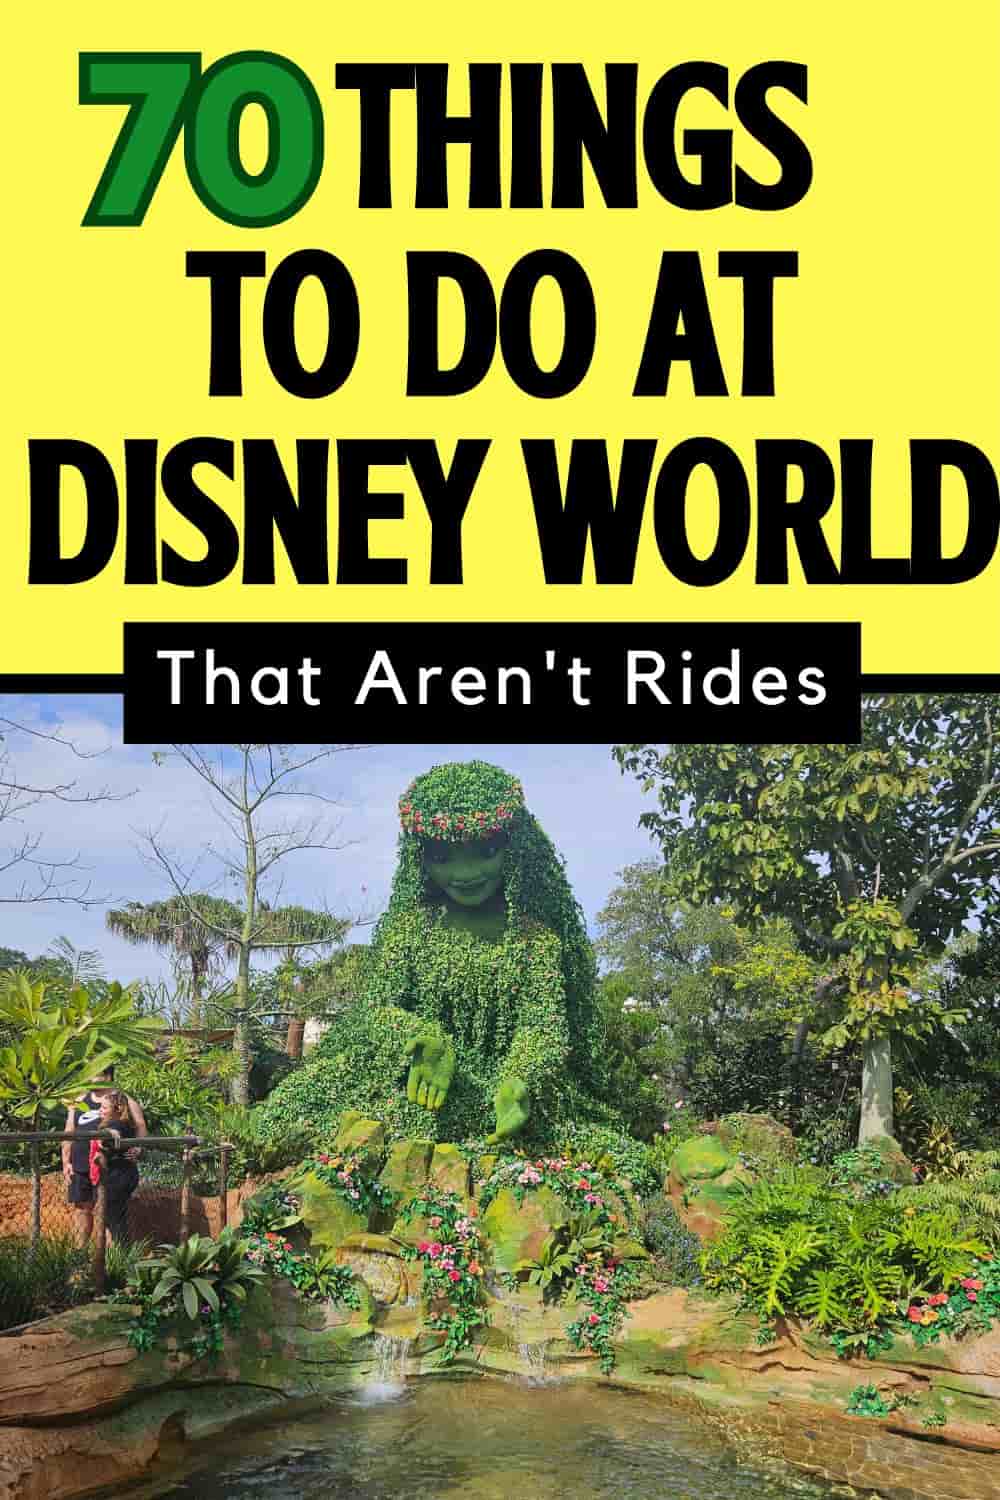 70 Things to Do at Disney World that aren’t Rides